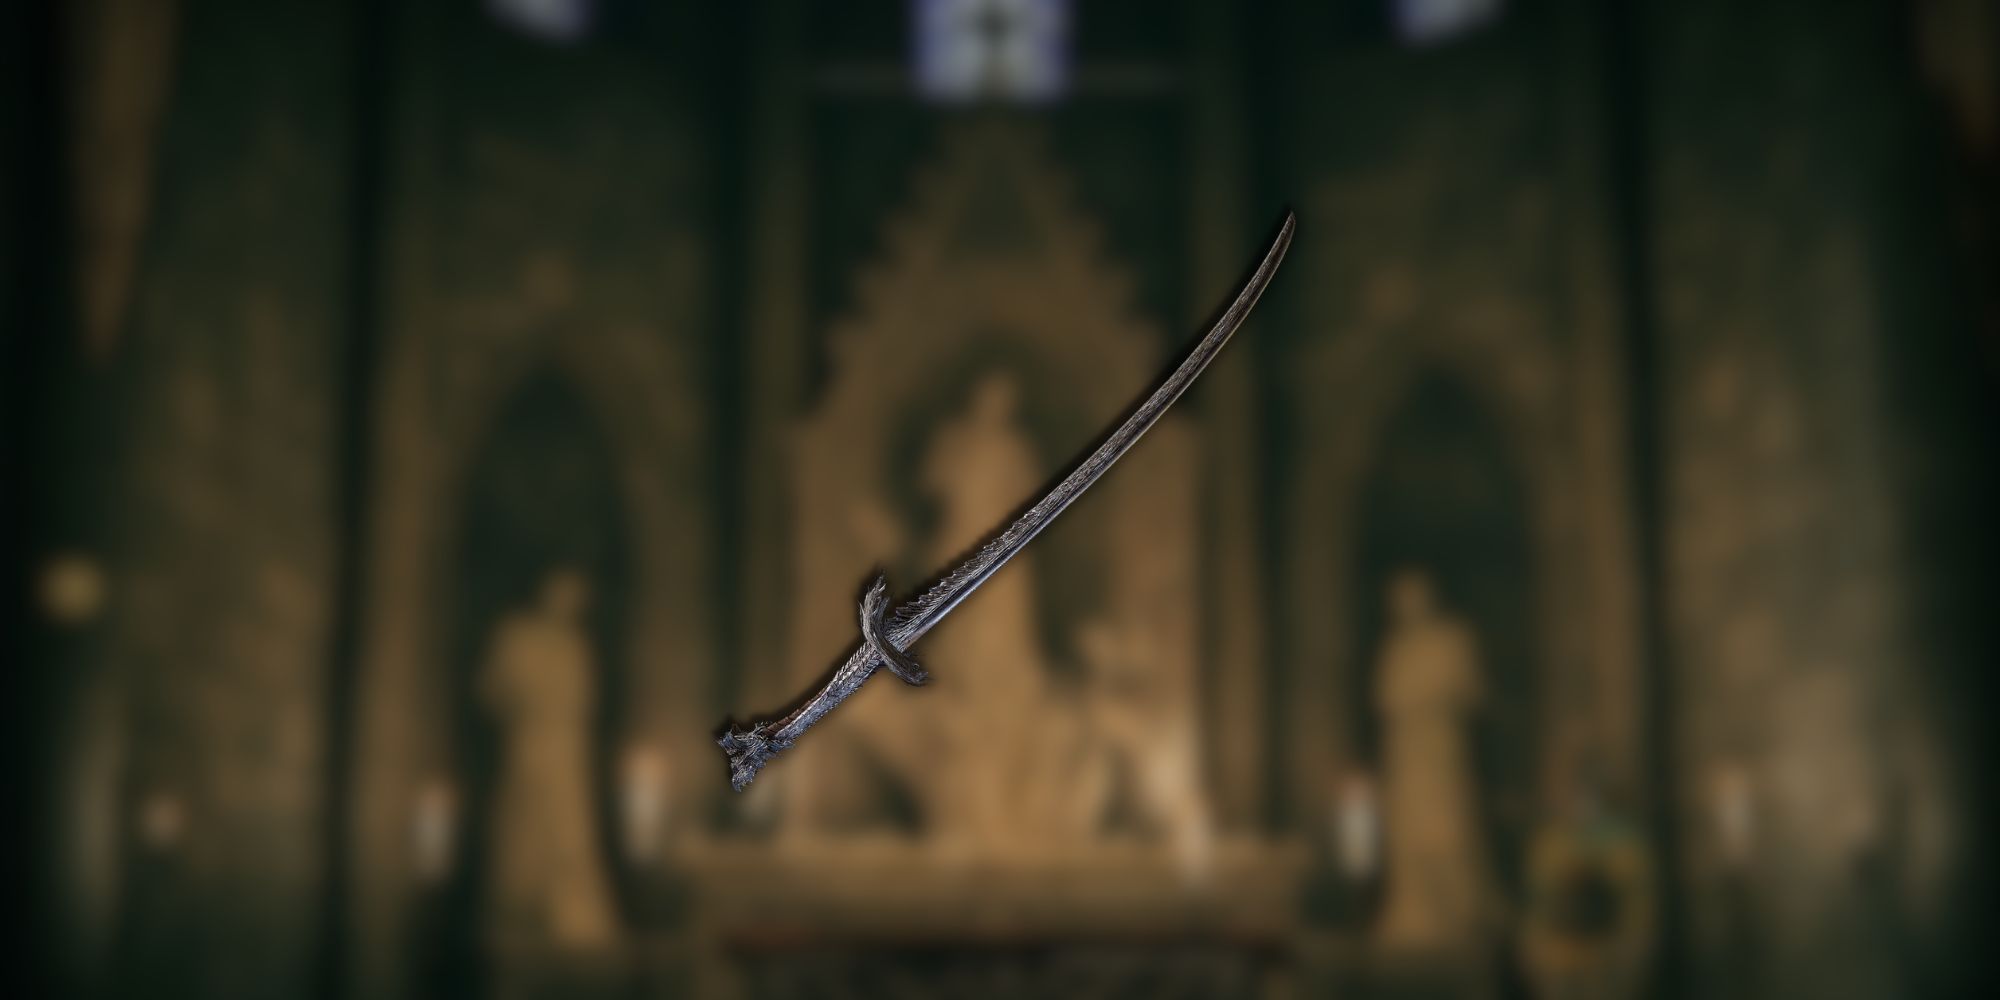 A metal katana with a simple handguard and a curved handle overlayed over a blurred background.